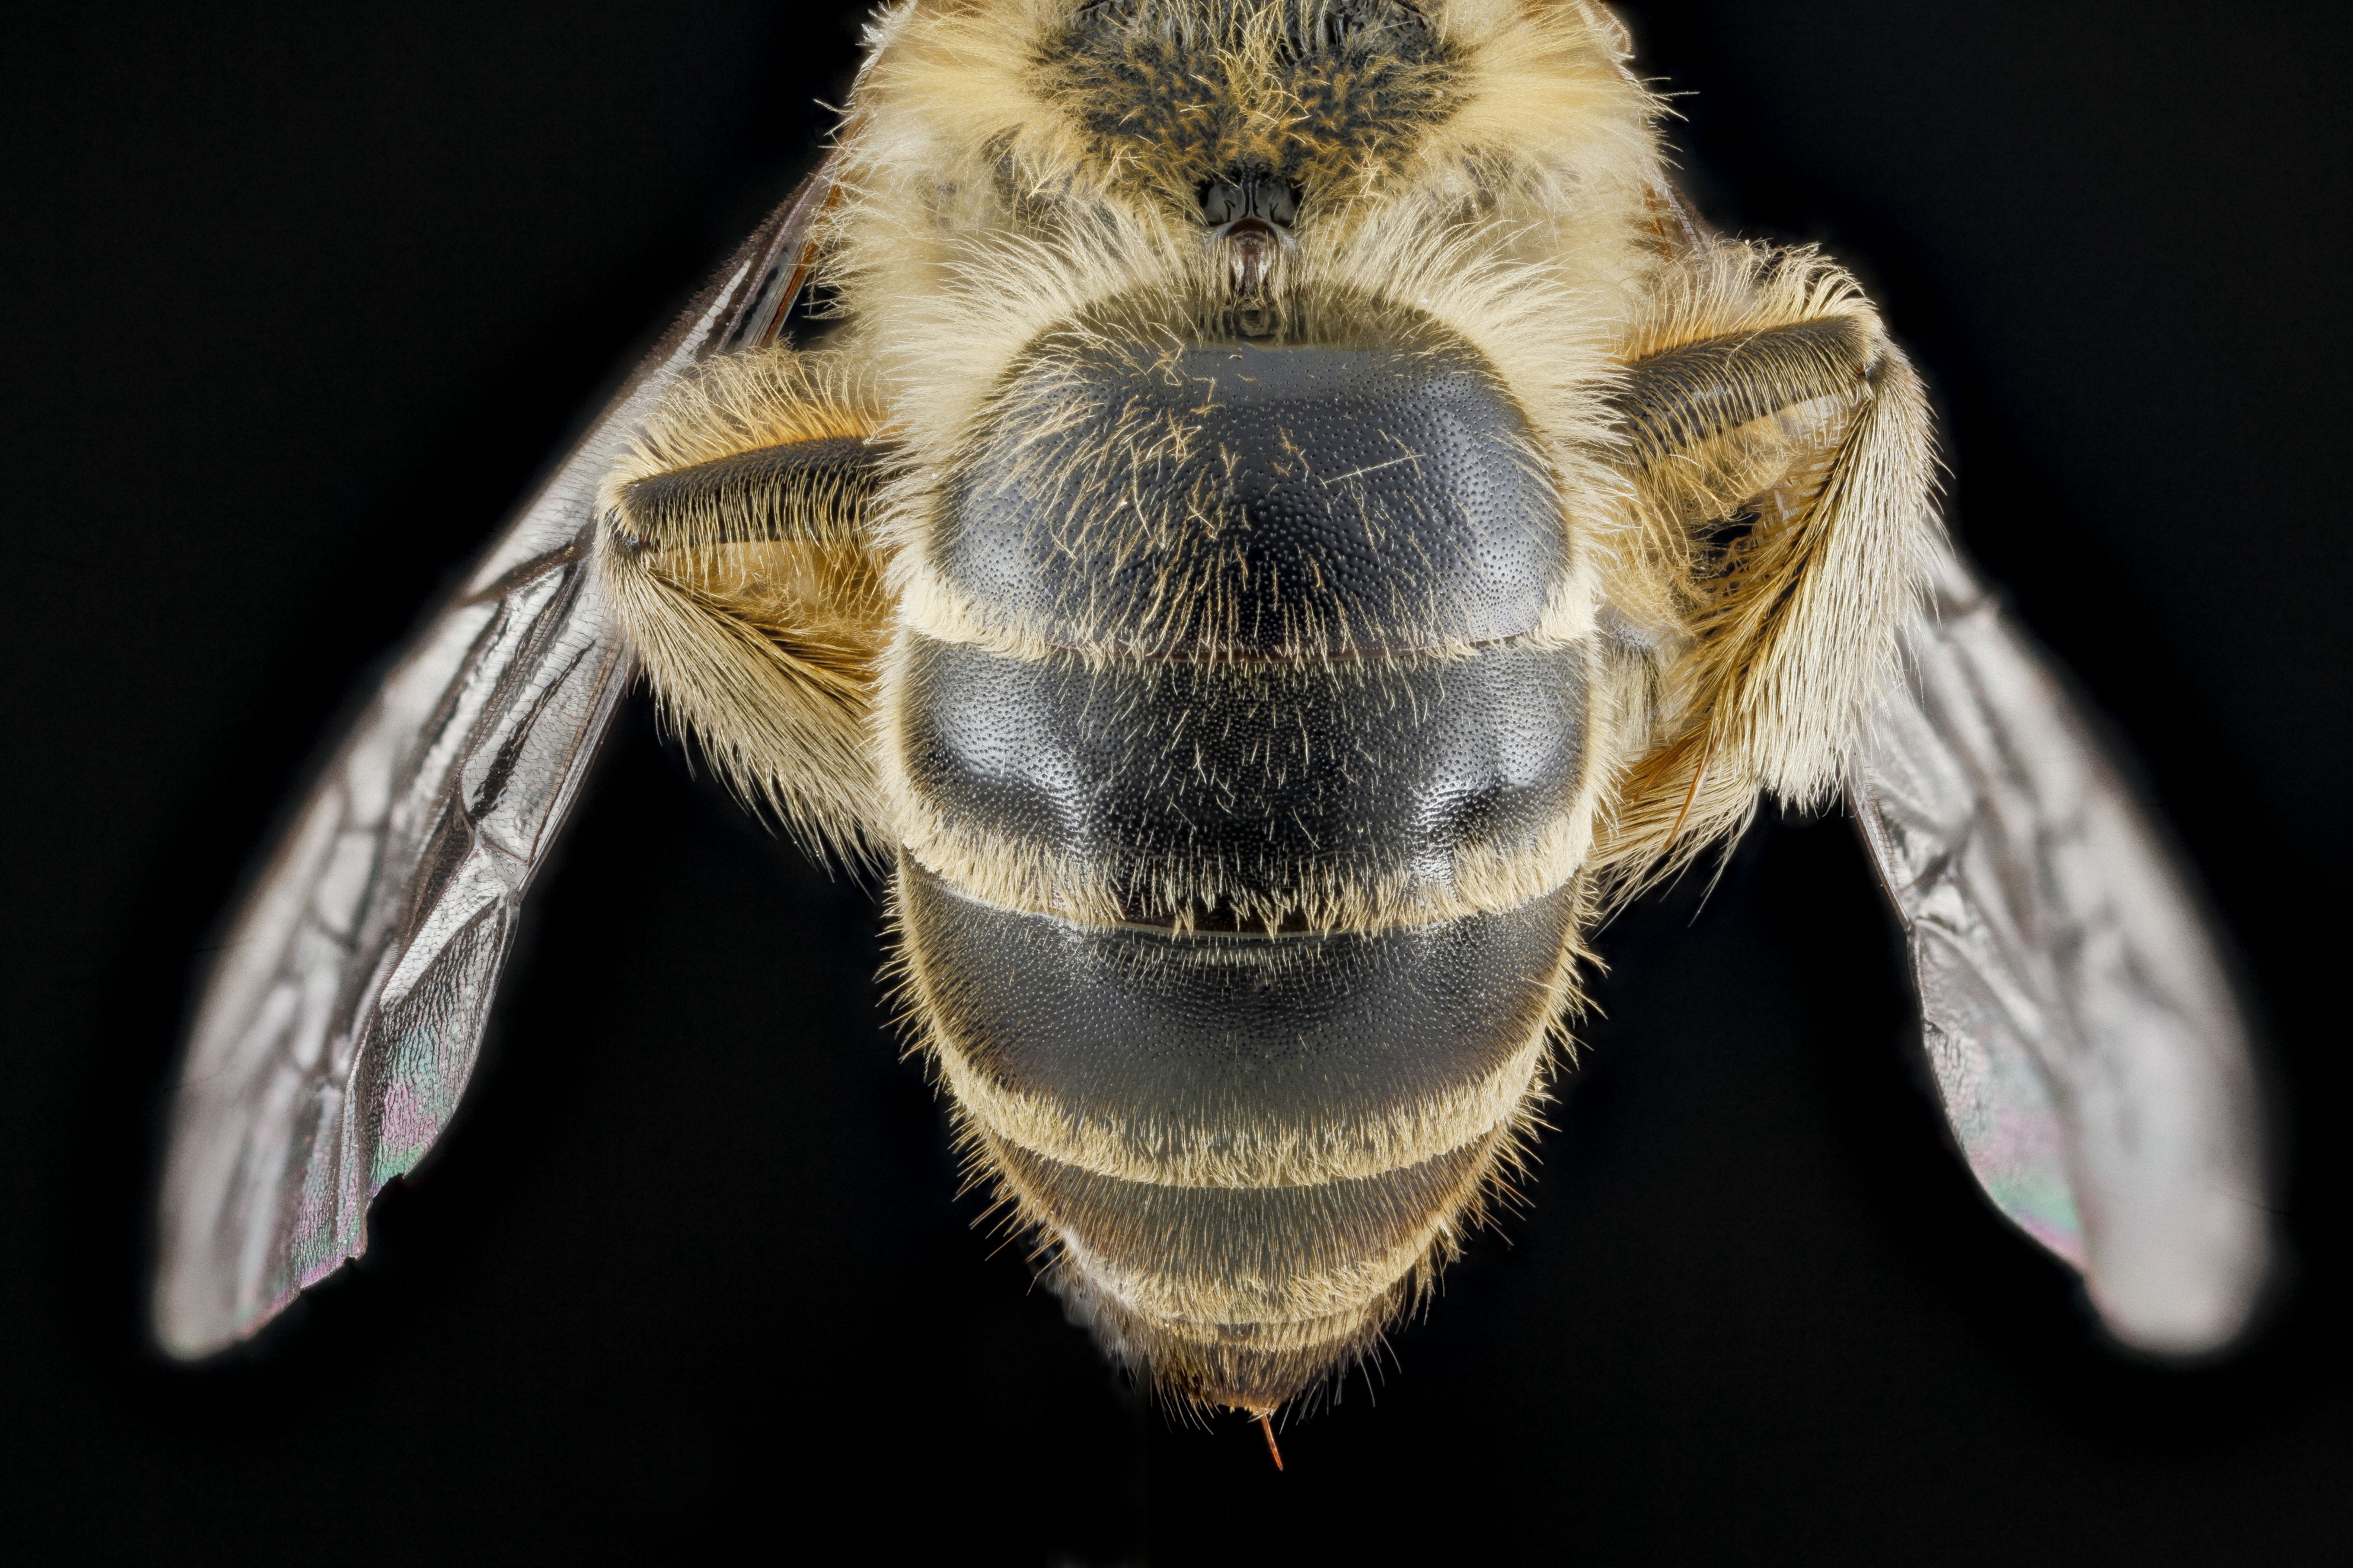 Colletes inaequalis, female, back1 2012-08-10-15.38.49 ZS PMax (7918574678)